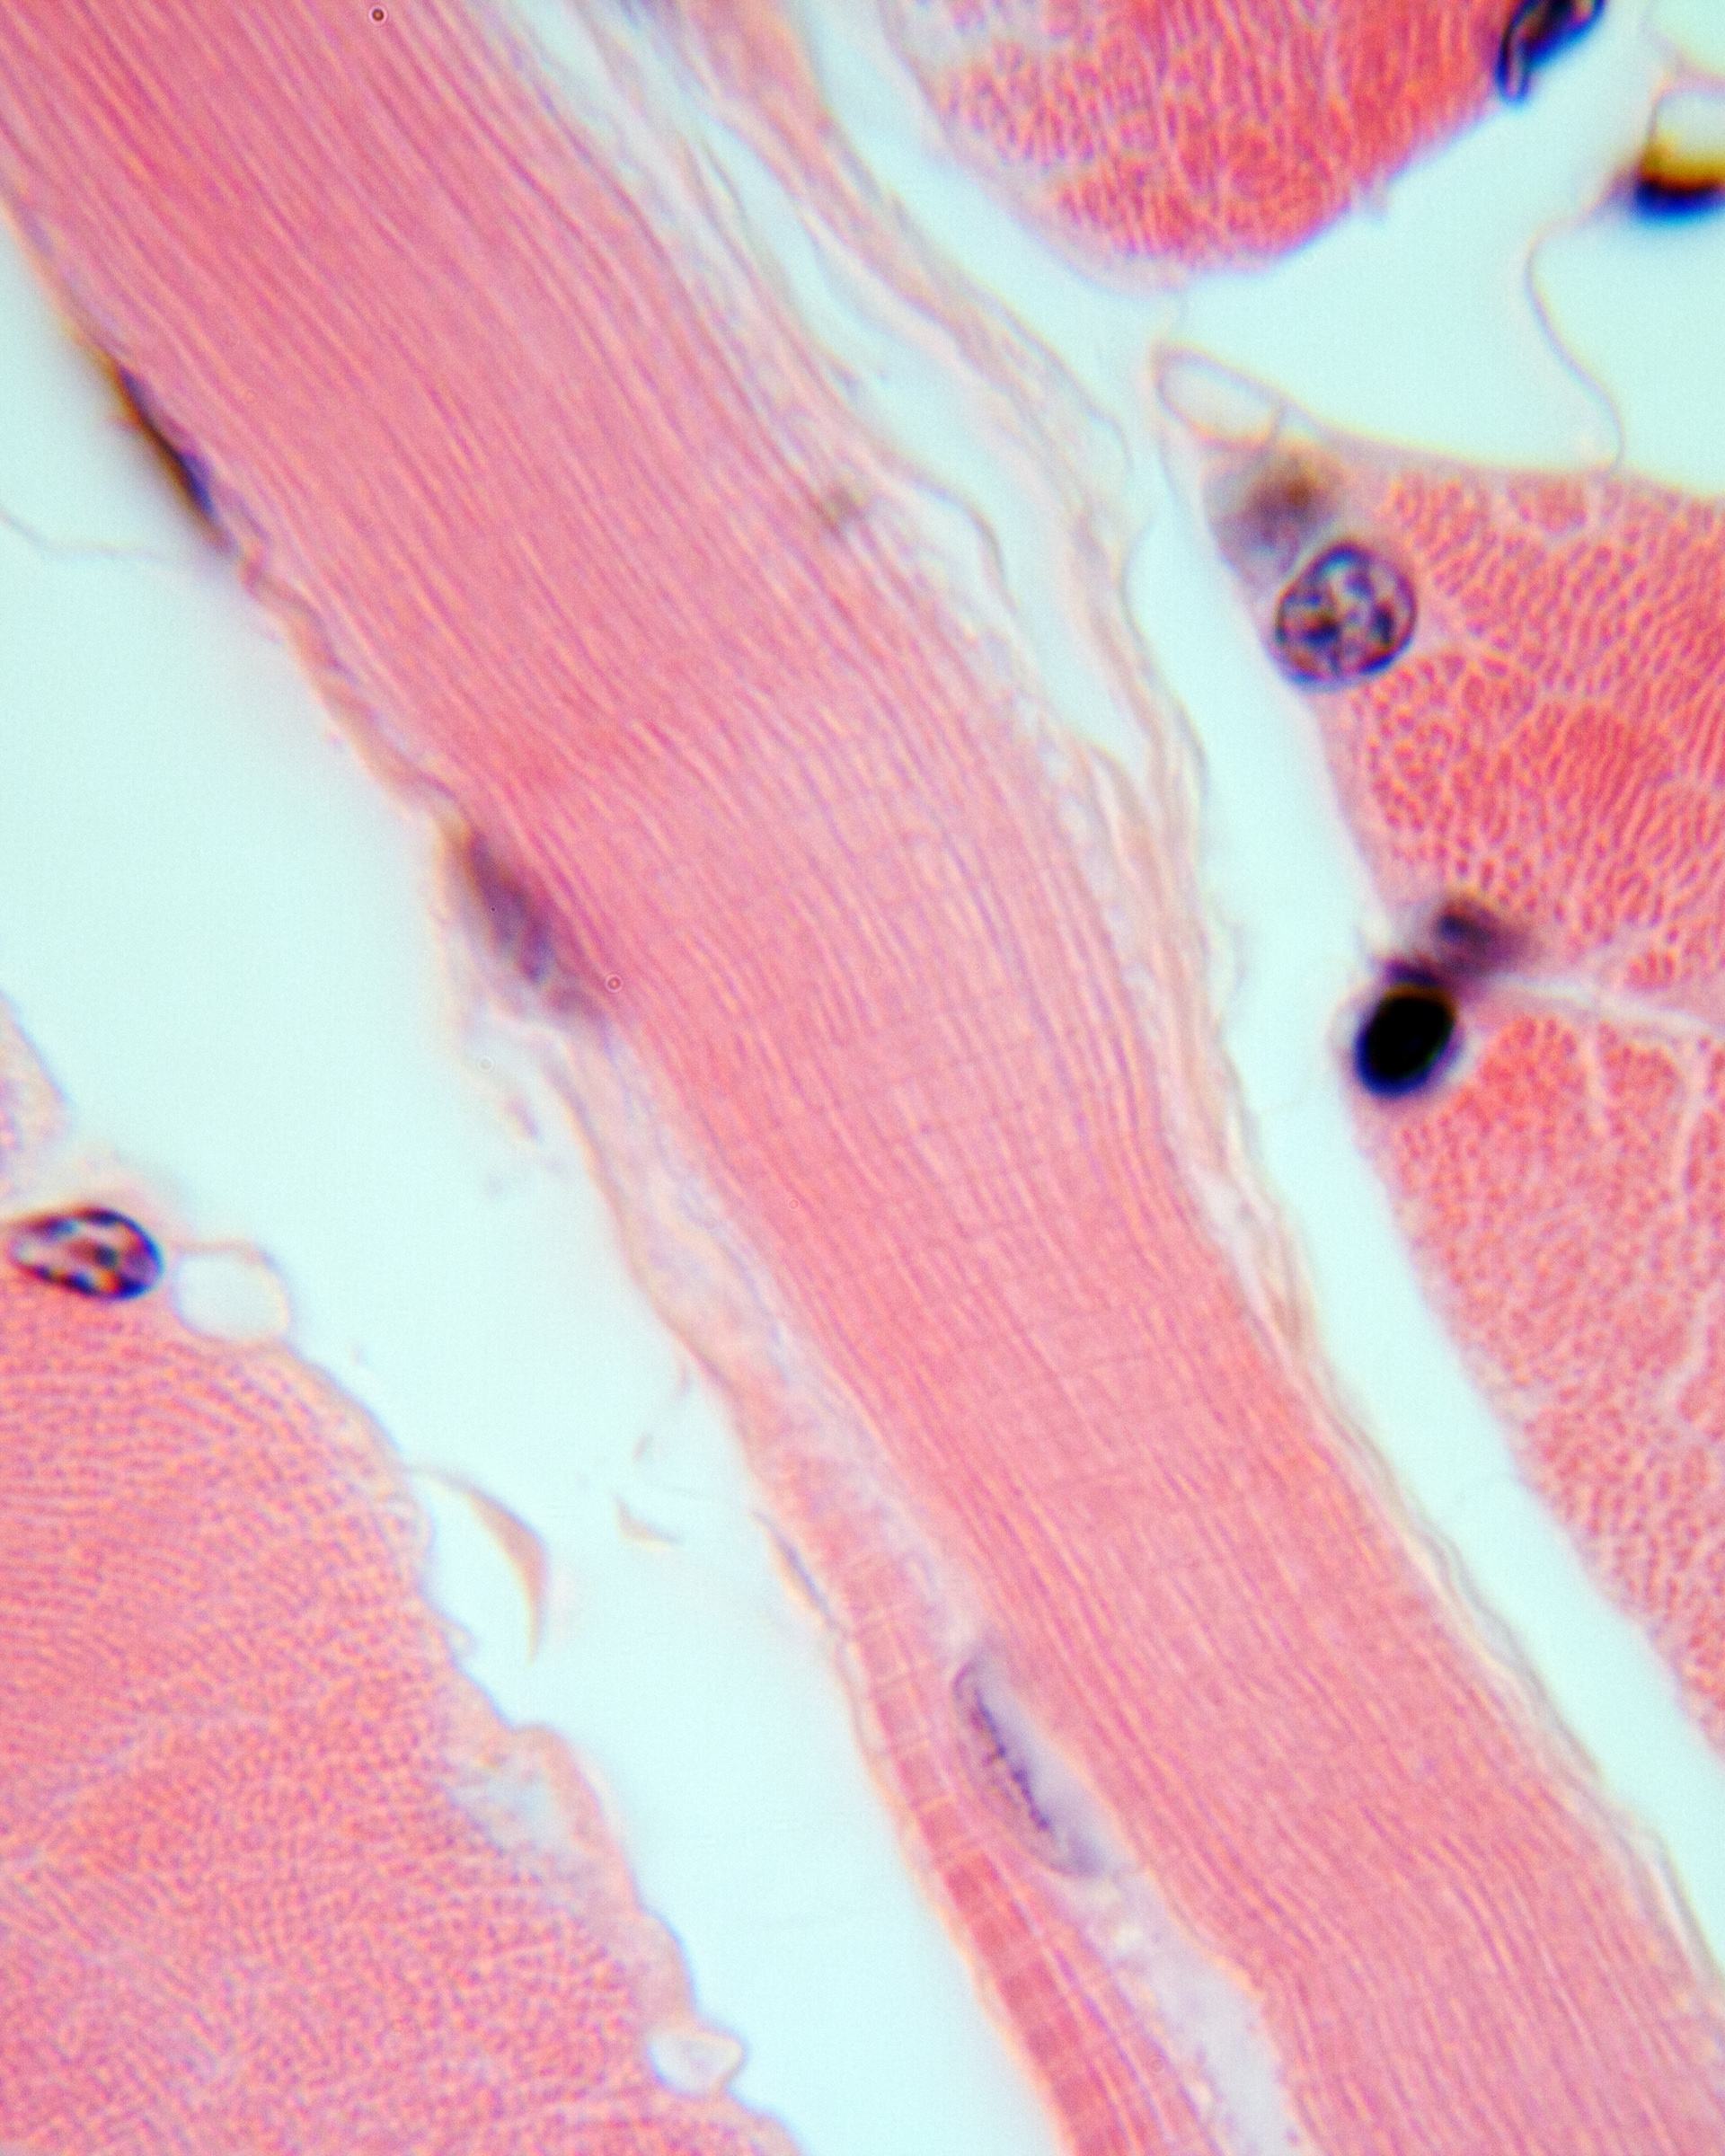 Muscle tissue photo